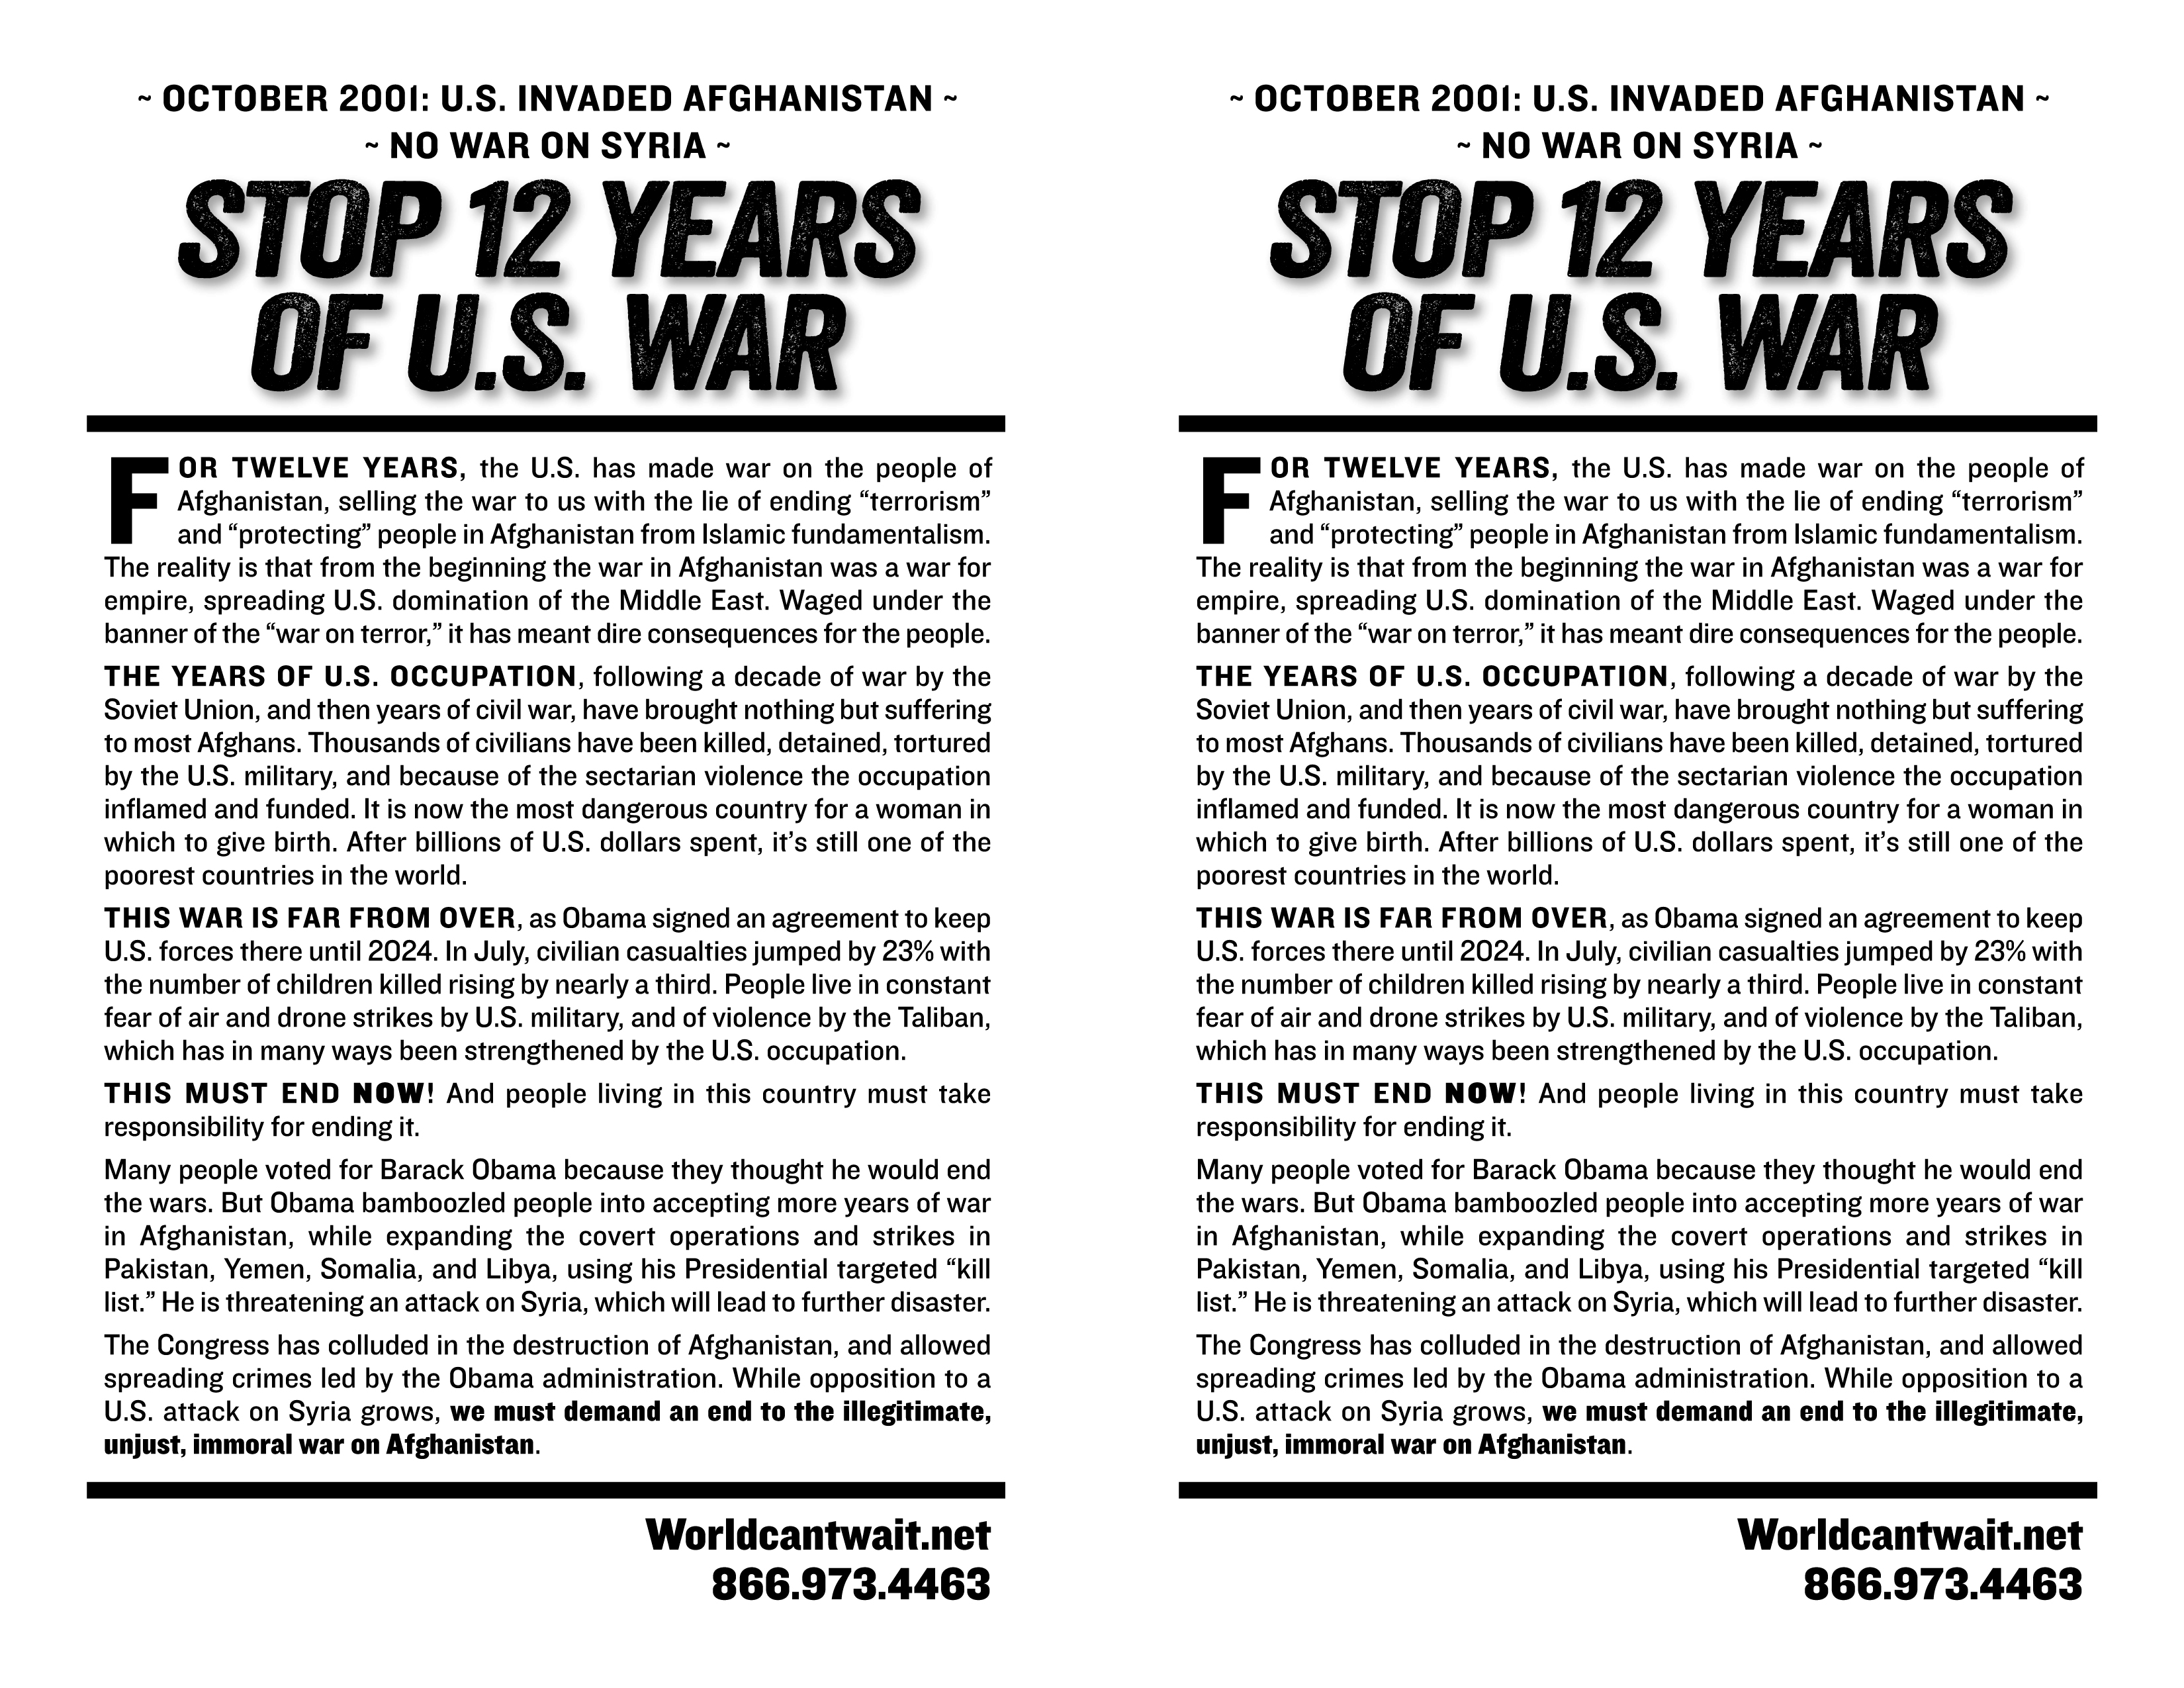 Protest: No War on Syria